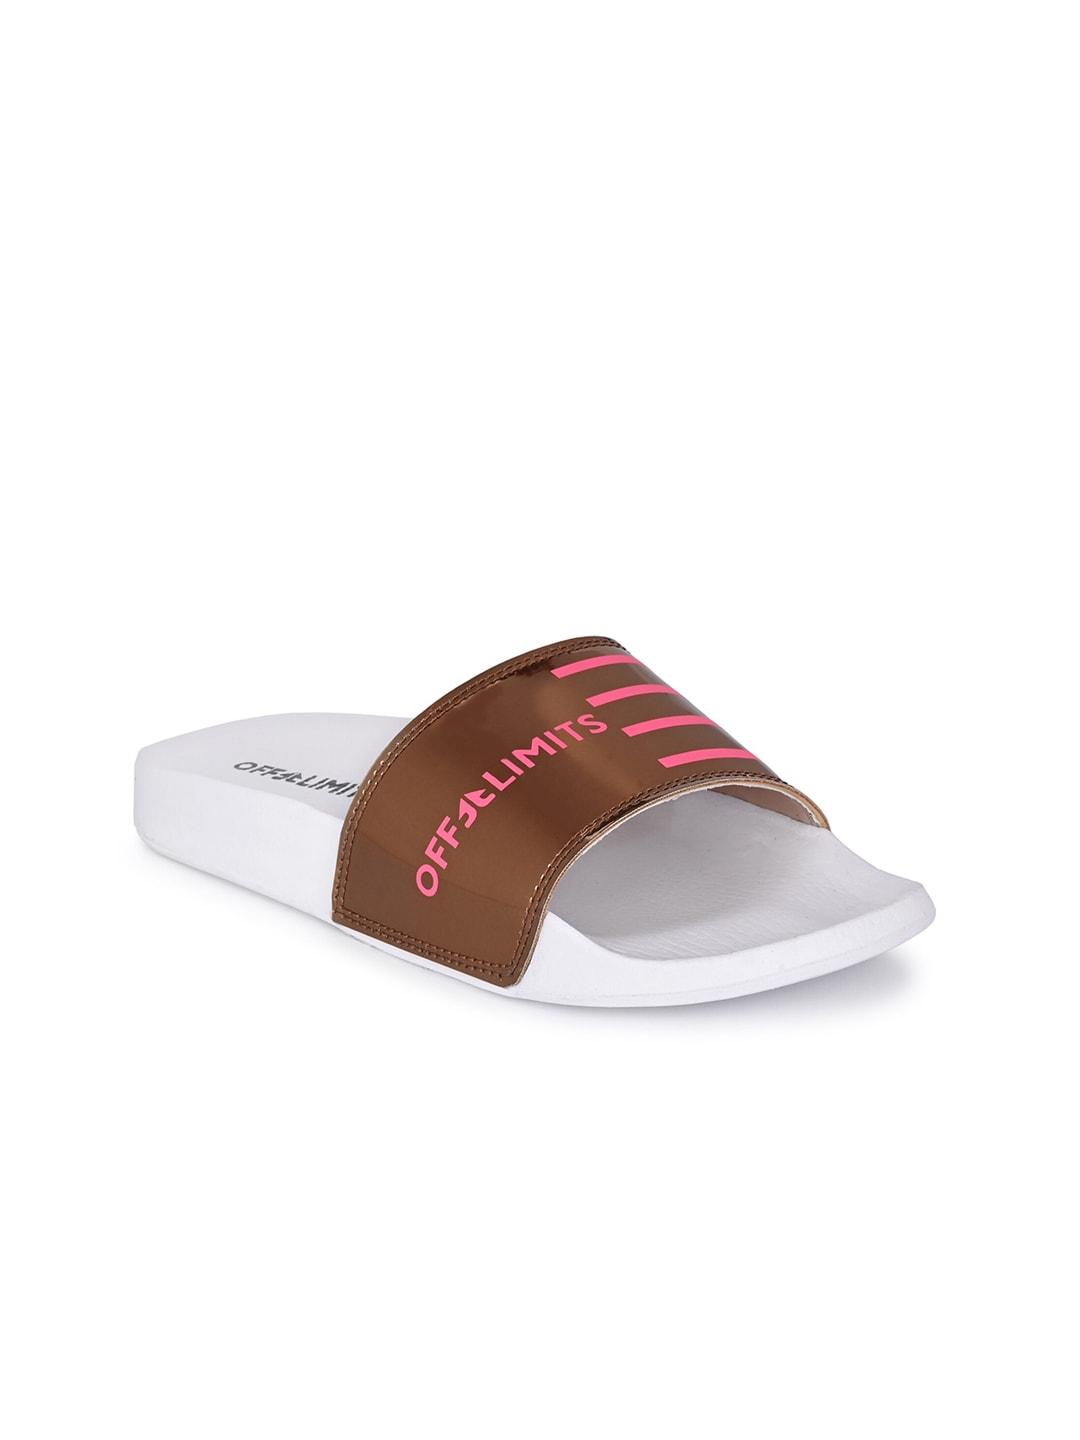 off limits women copper-toned & pink printed sliders